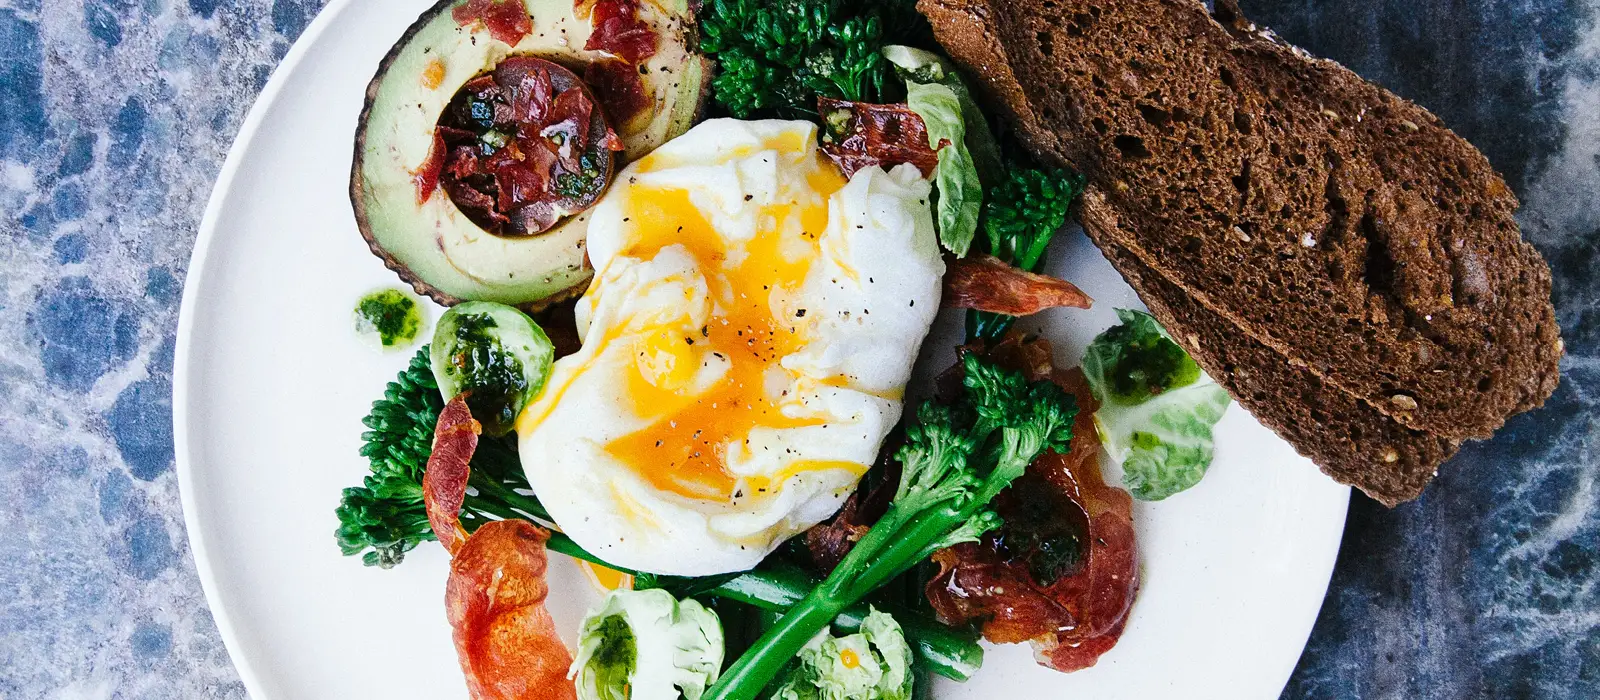 Poached egg with veggies and bacon